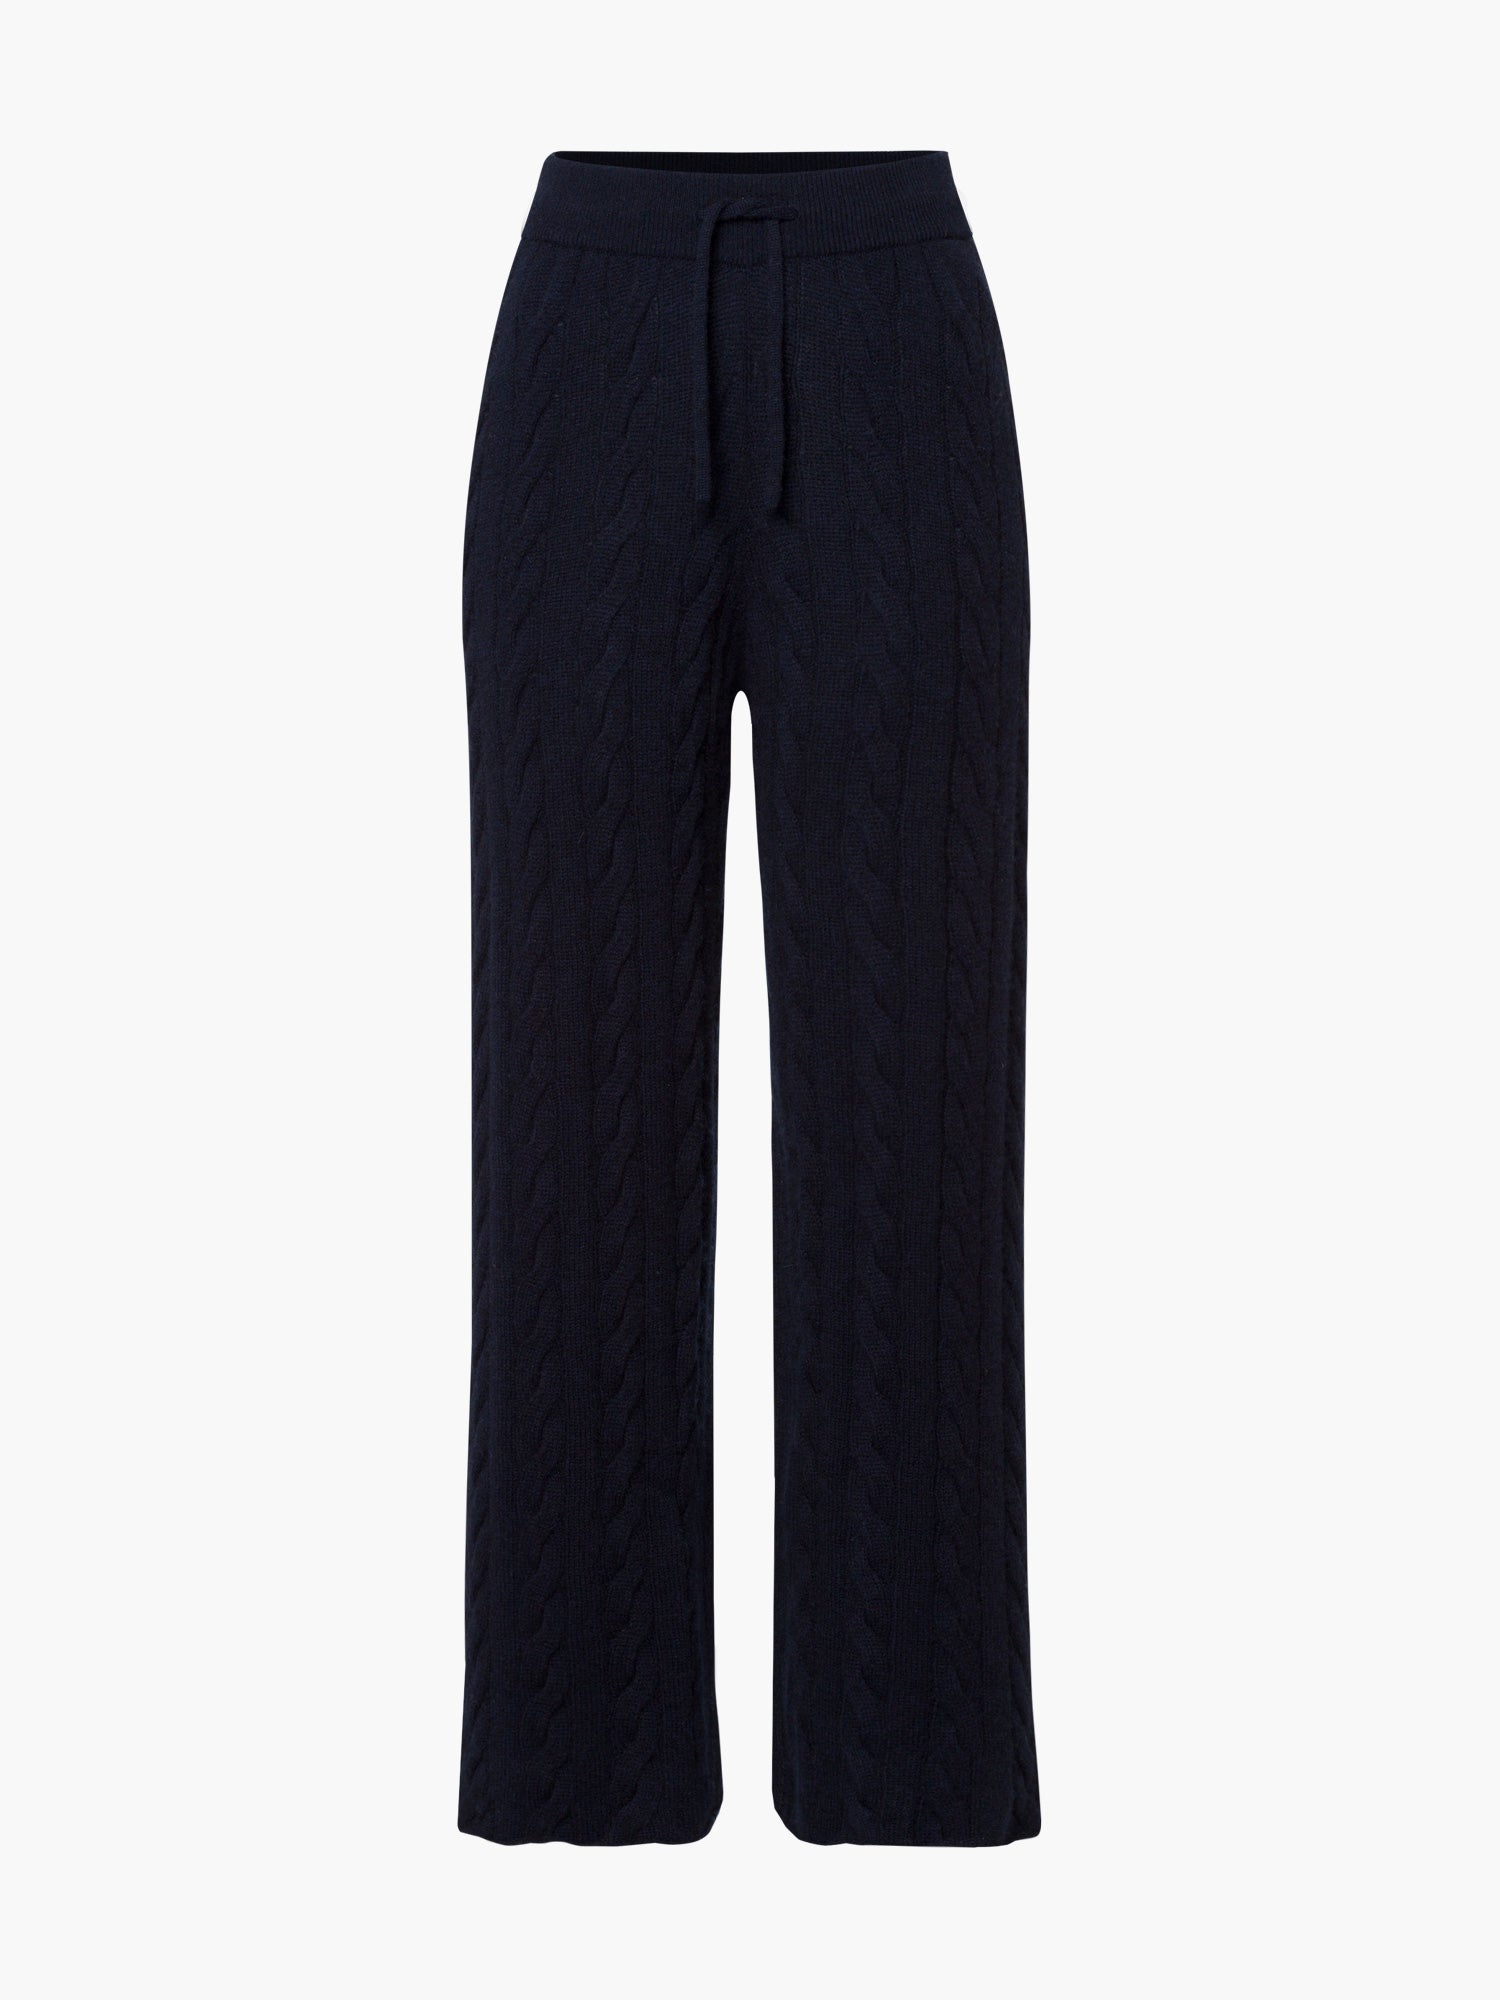 FTC-Cashmere-OUTLET-SALE-Trousers-Hosen-ARCHIVE-COLLECTION_2602bb2d-9df1-4cc2-88c6-be89a8bfddac.jpg